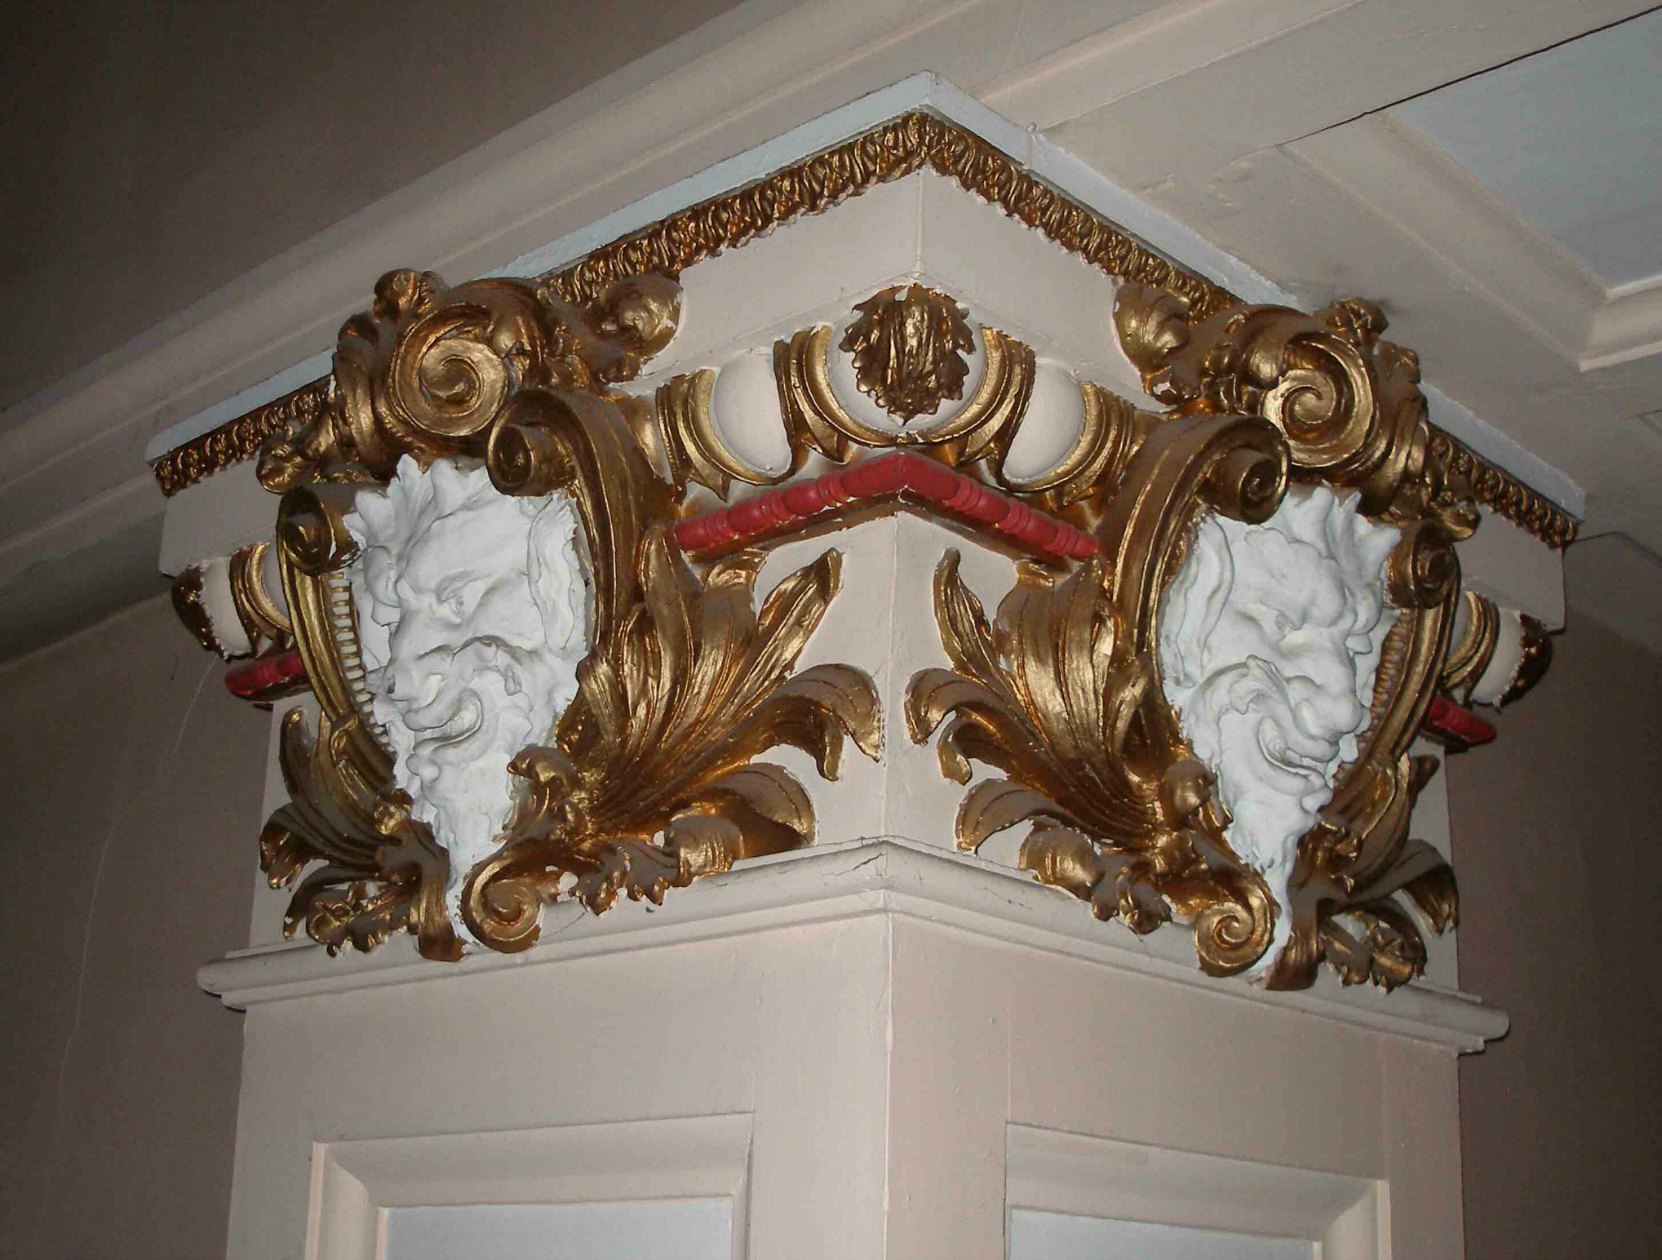 These Satyrs faces are original interior detailing in the McPherson Playhouse, 3 Centennial Square. This theate was built in 1914 by architect Jesse M.Warren and much of its original interior detail is still intact.